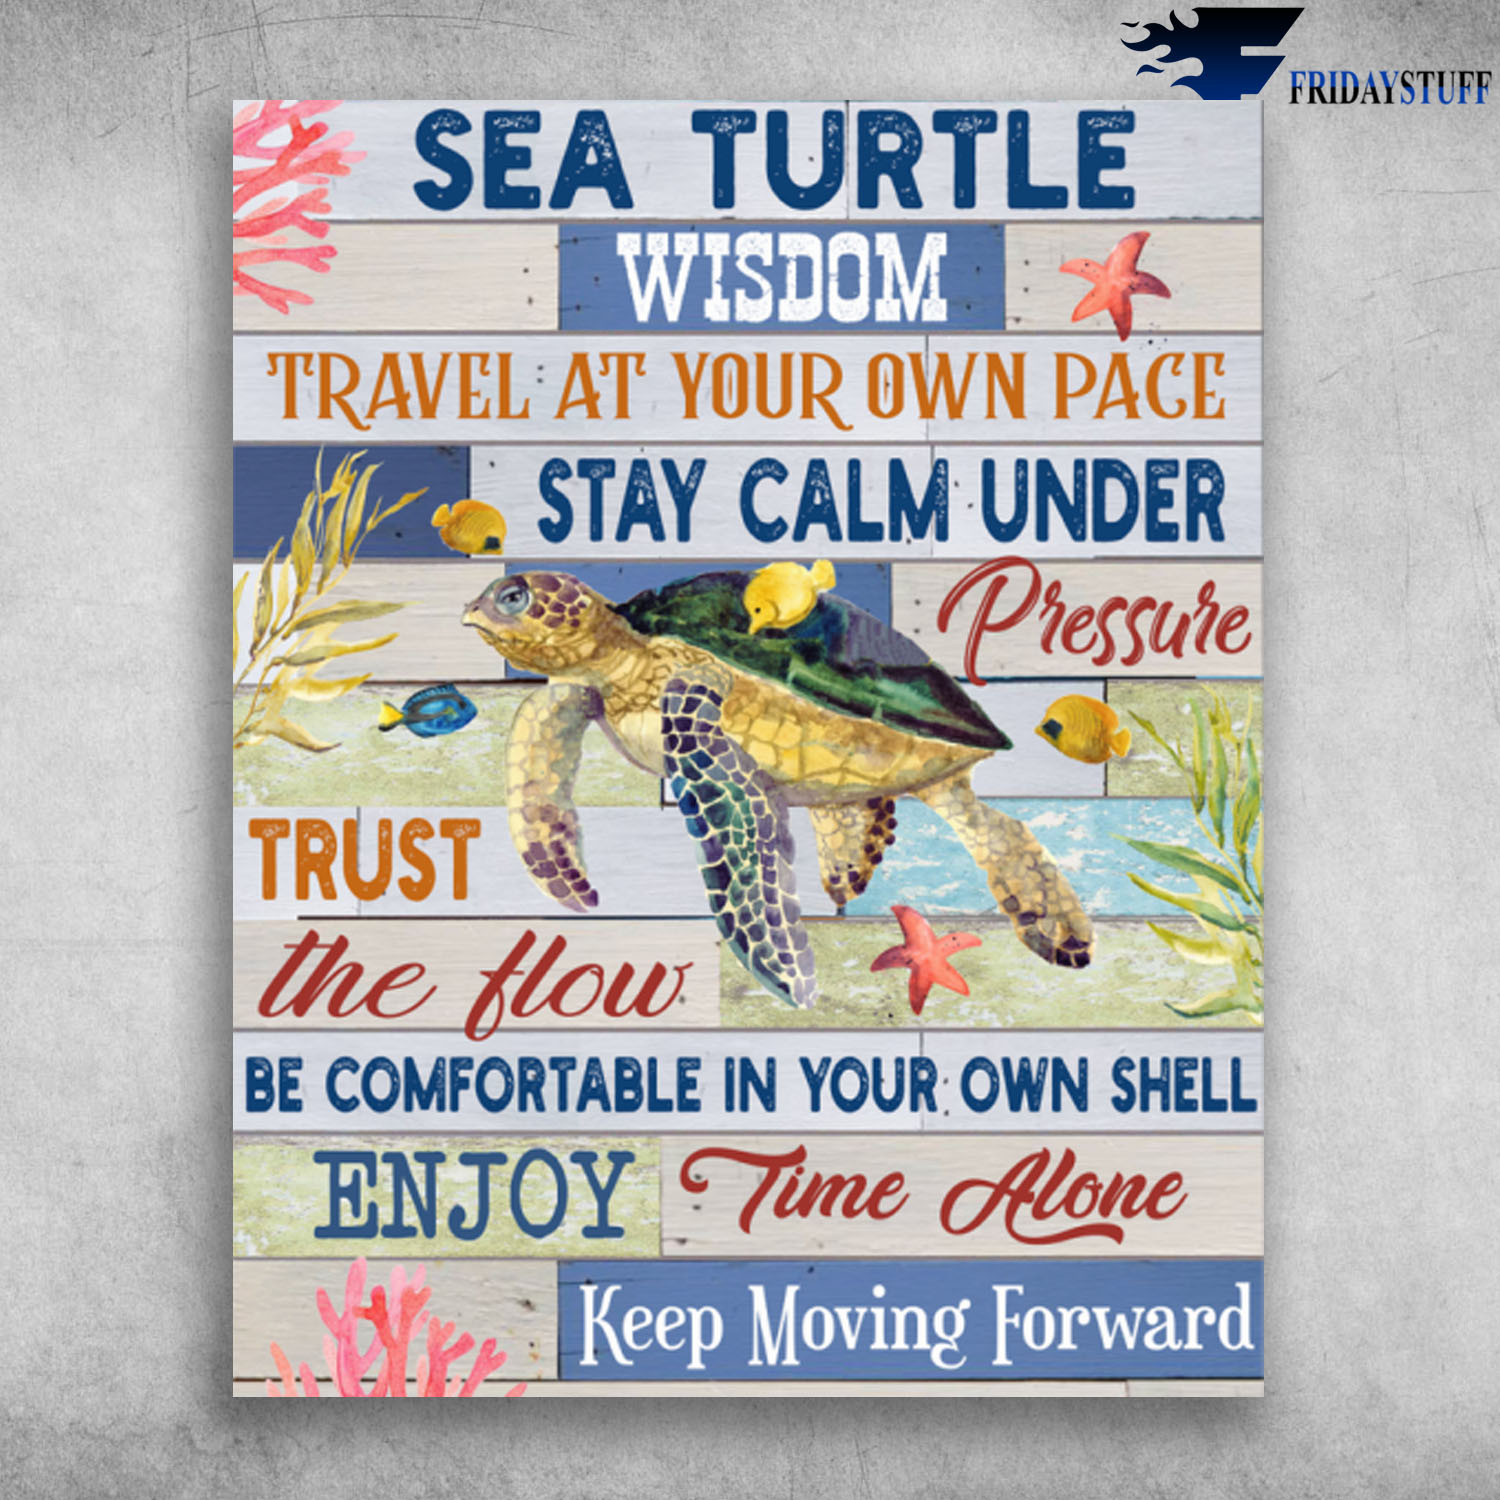 Beautiful Sea Turtle Wisdom Travel At Your Own Pace Stay Calm Under Pressure